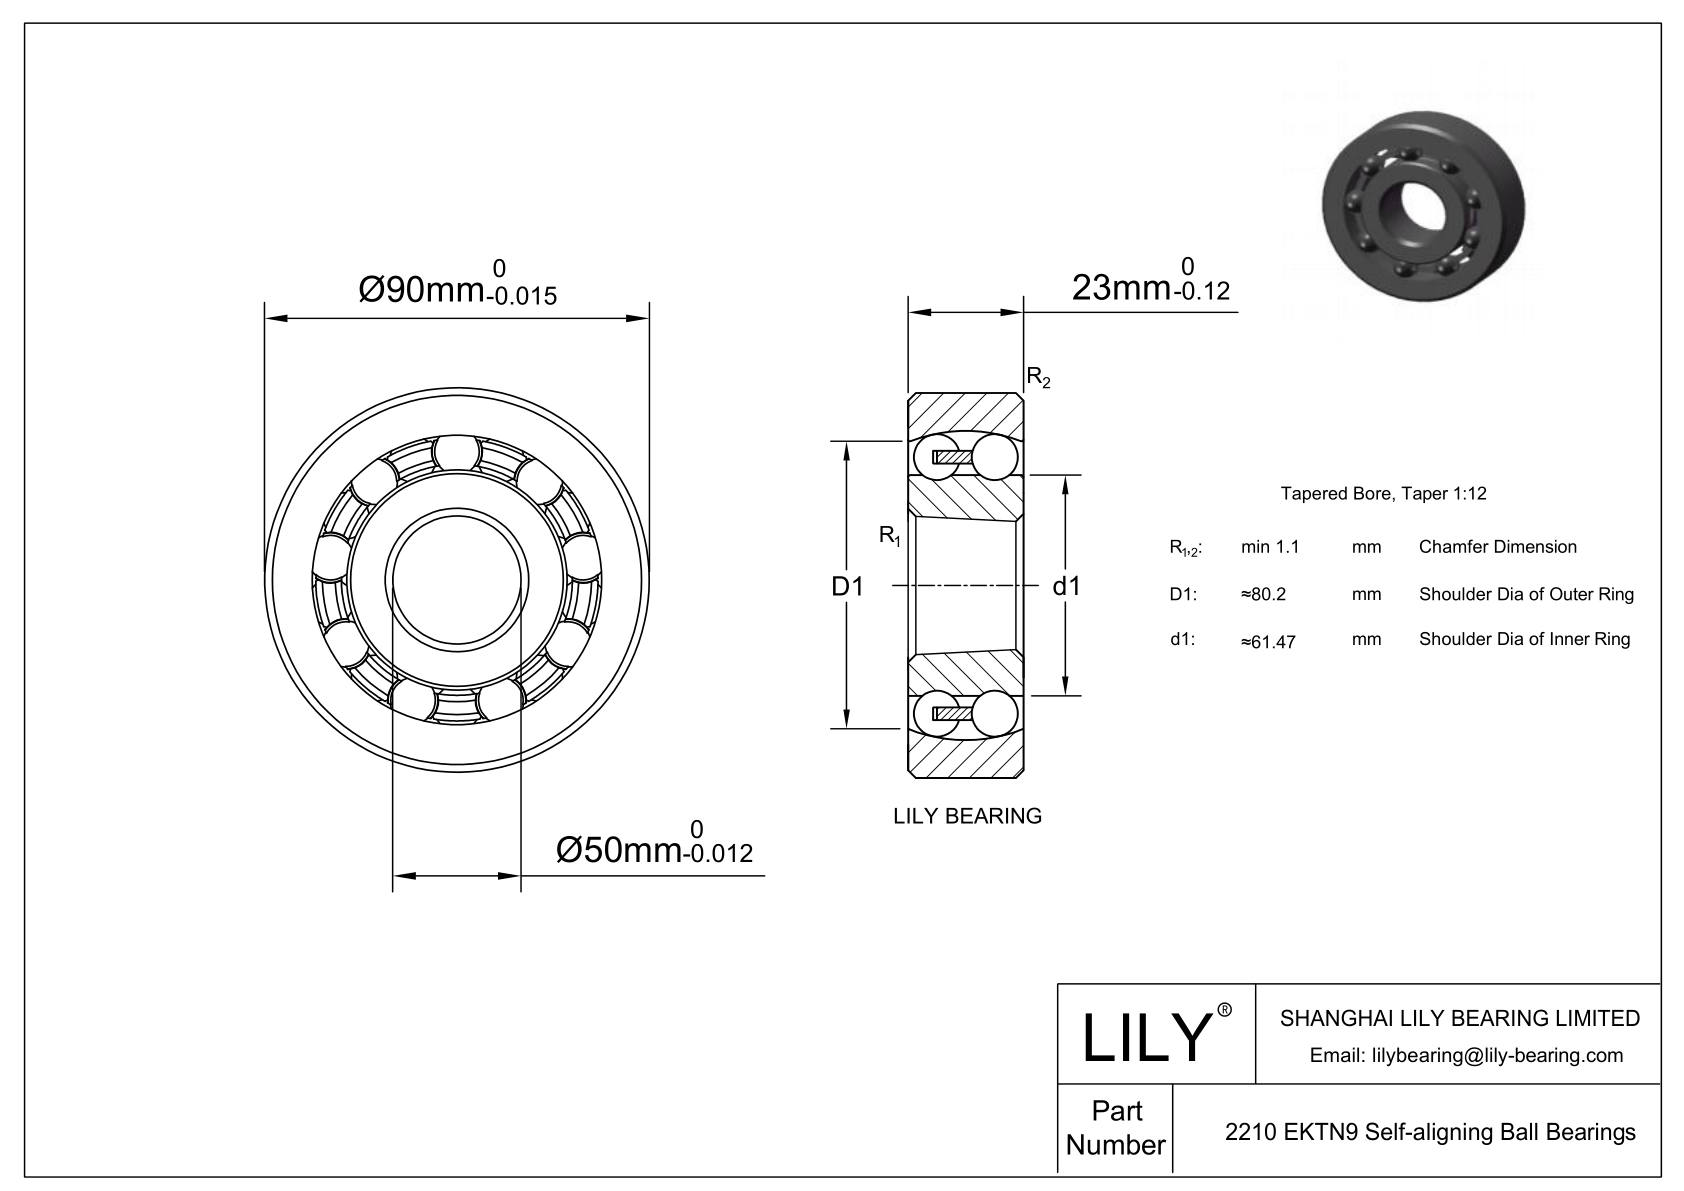 CE2210SI Silicon Nitride Self Aligning Ball Bearings cad drawing